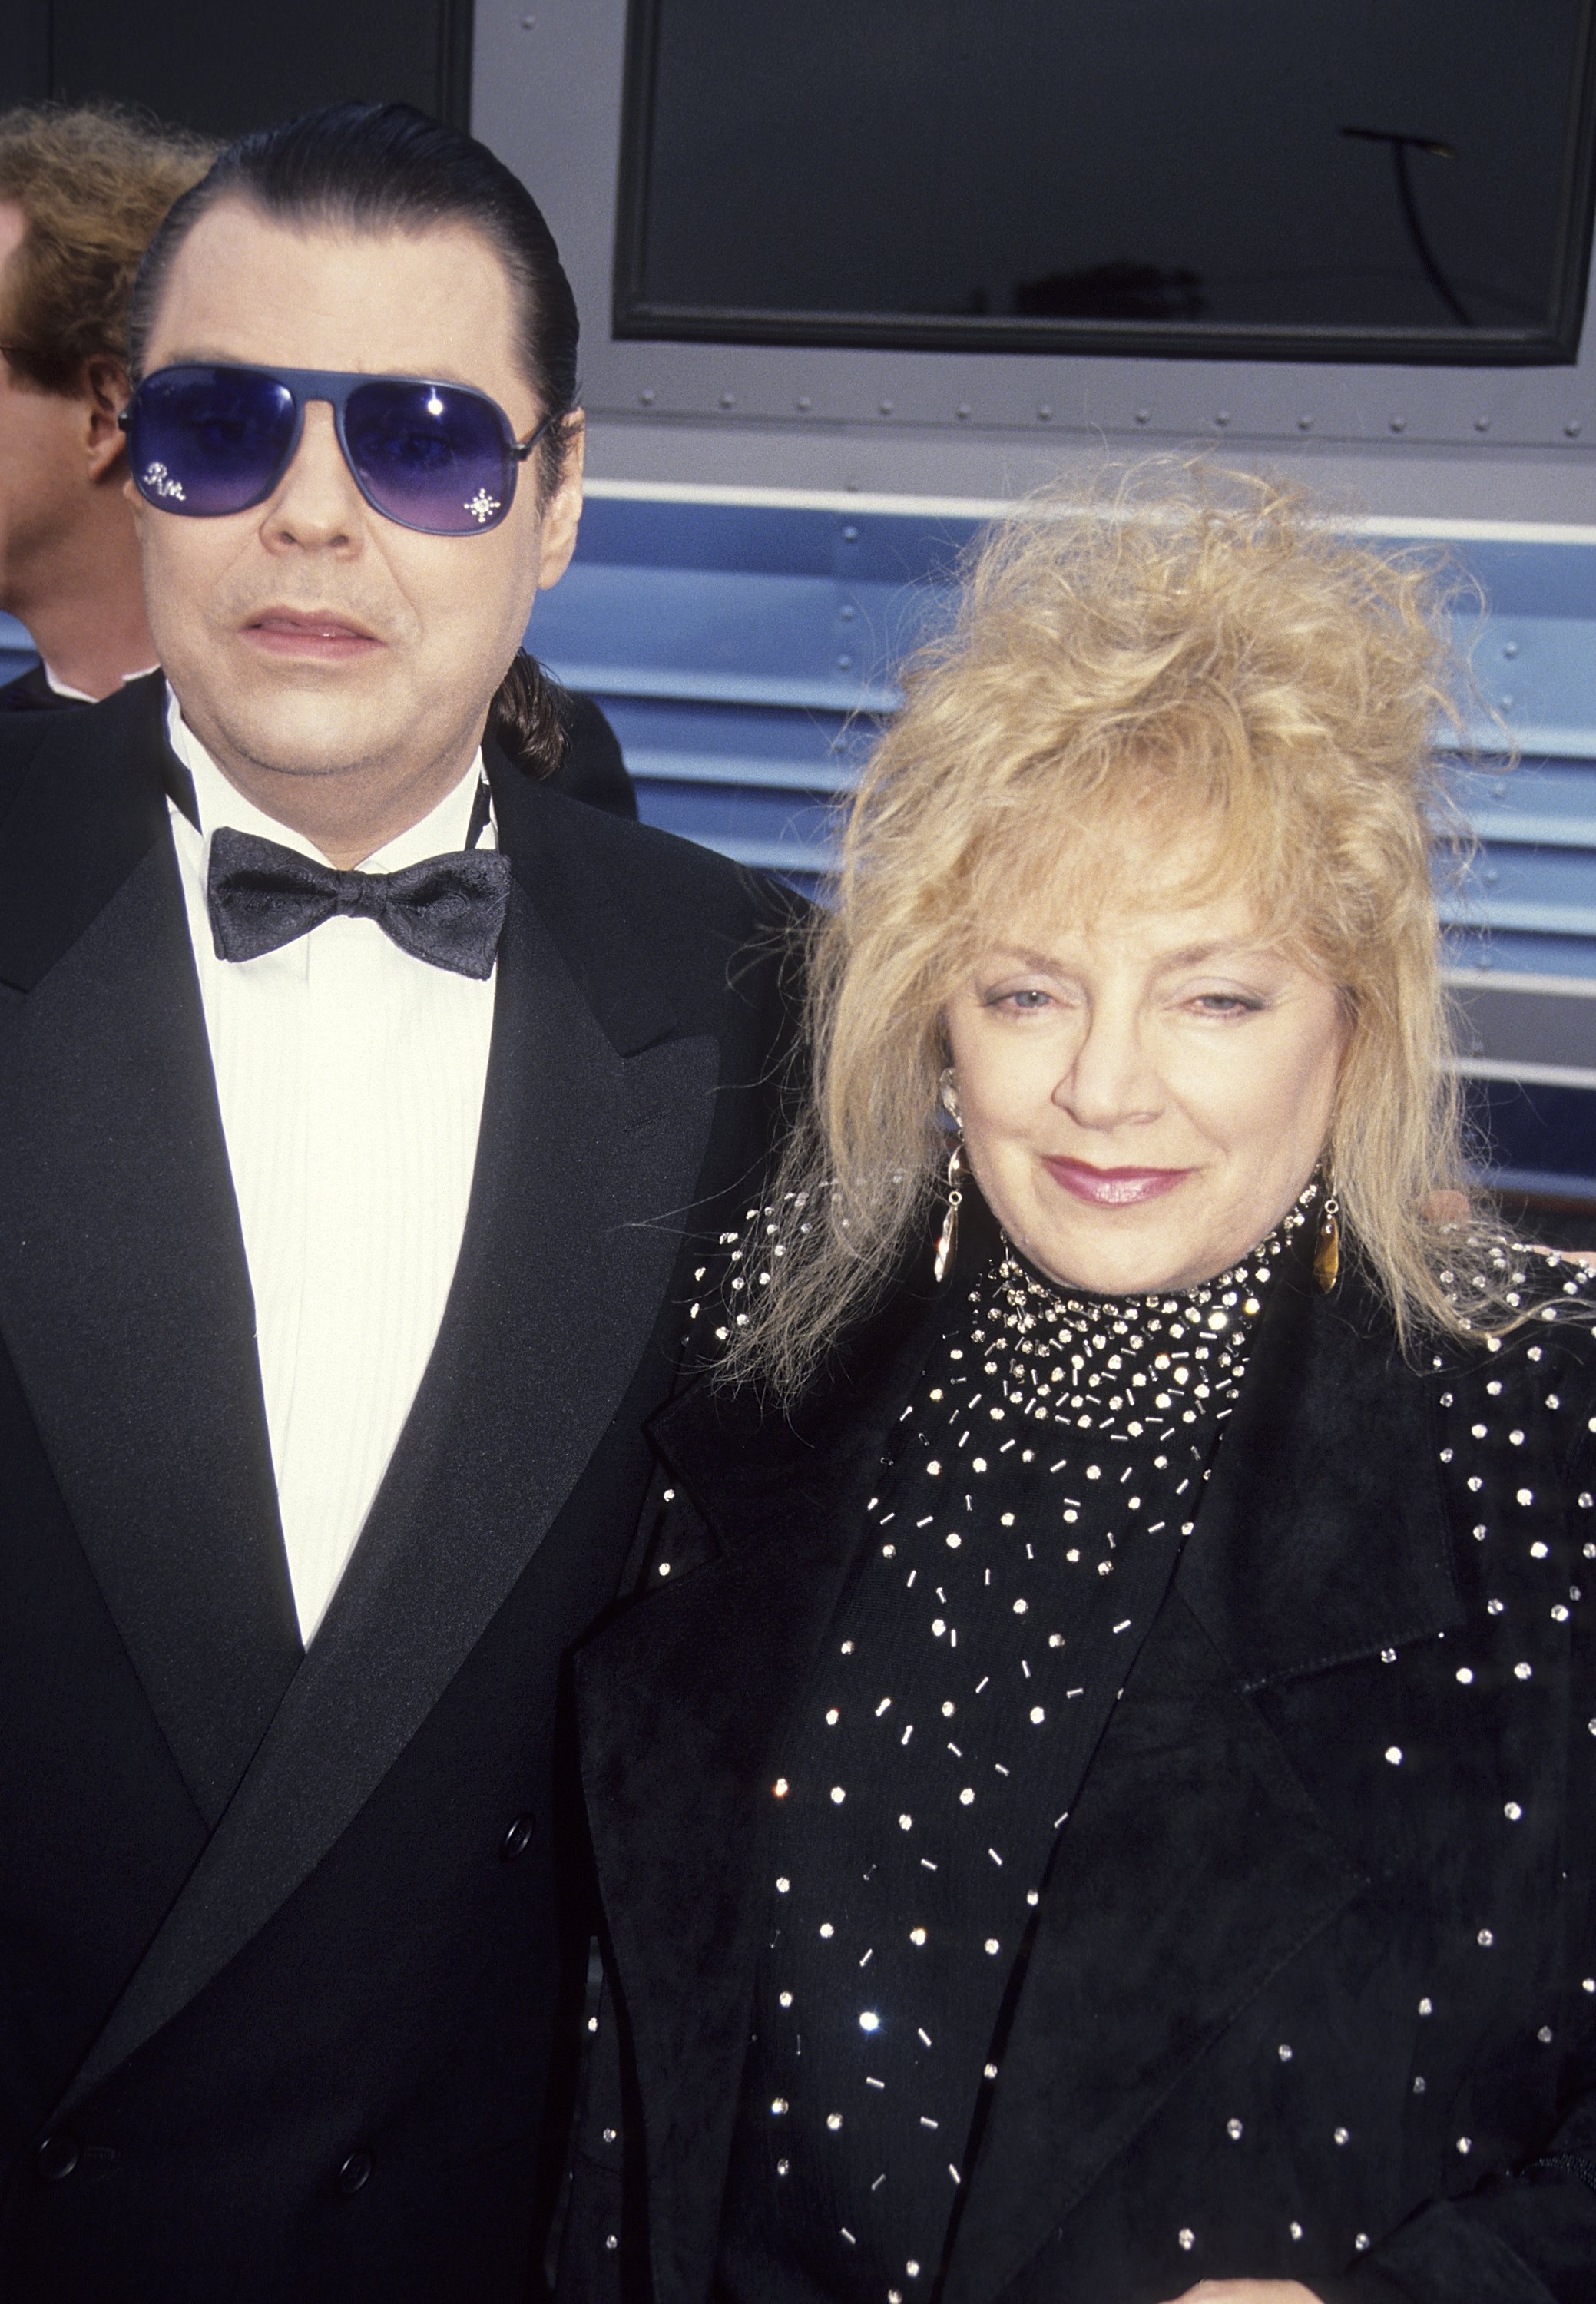 Ronnie Milsap and Joyce Reeves arriving at the 26th Annual Academy of Country Music Awards on April 24, 1991 | Source: Getty Images